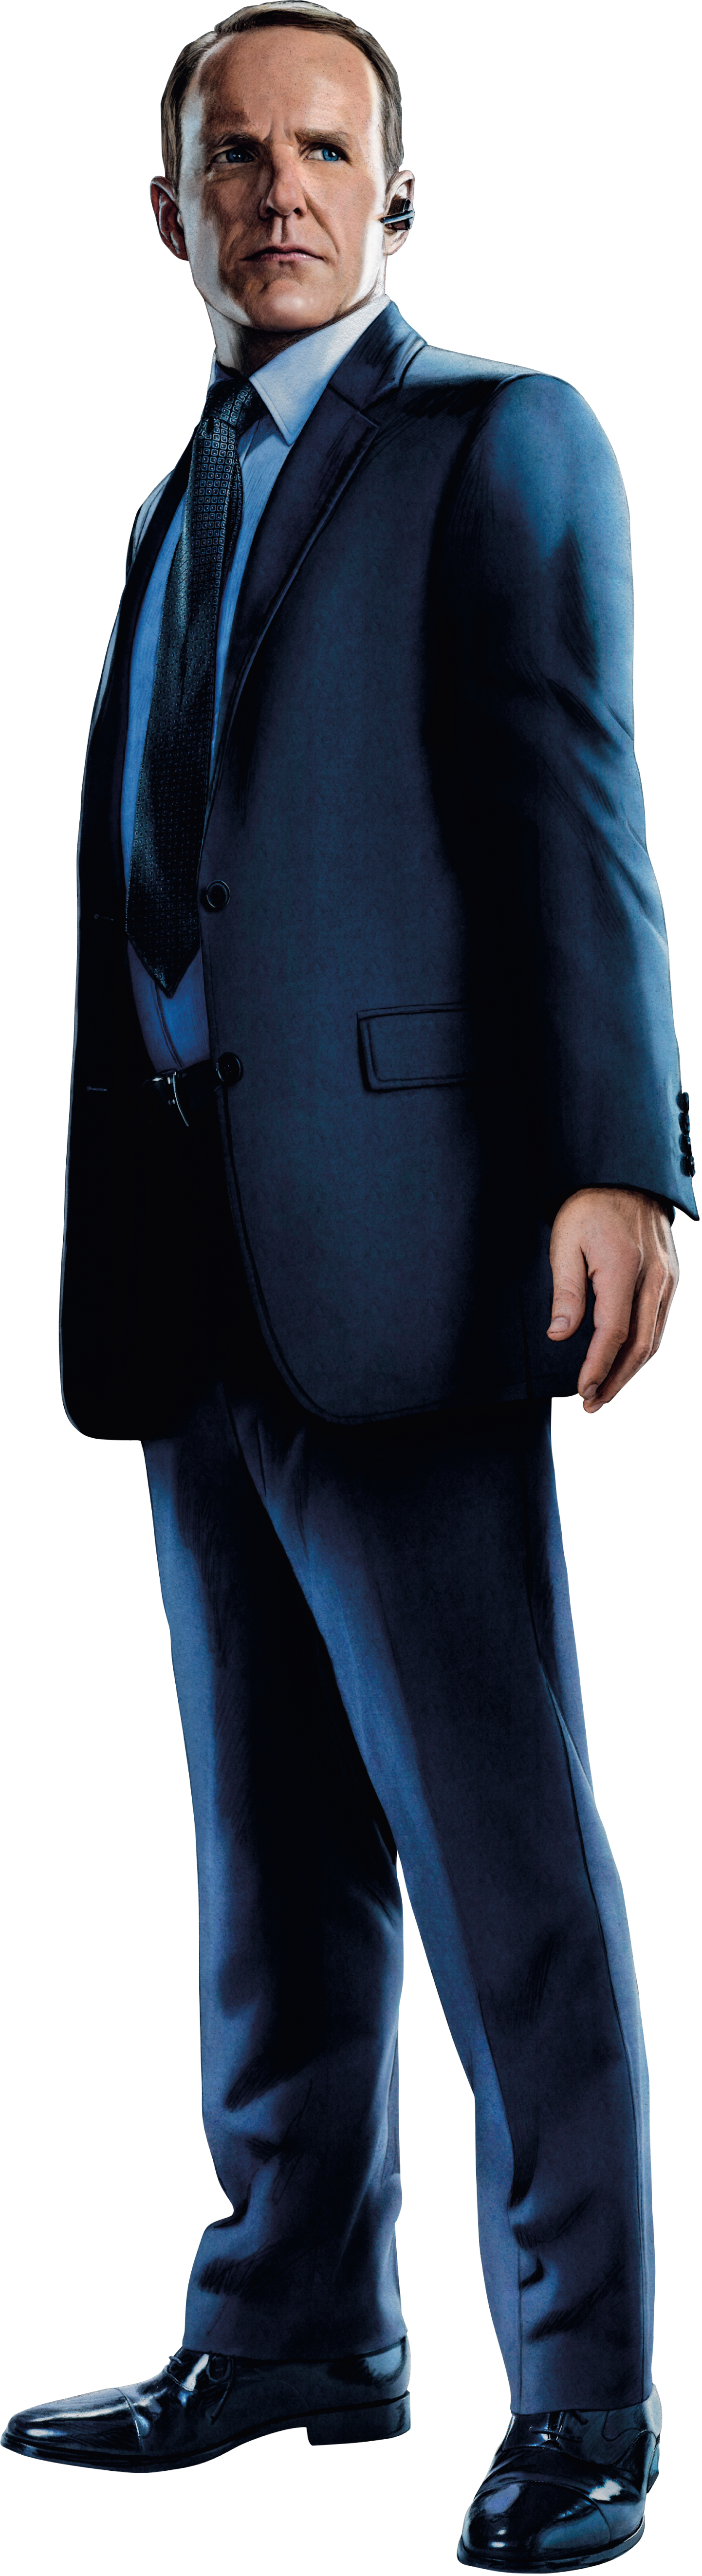 Agent PNG - 169926